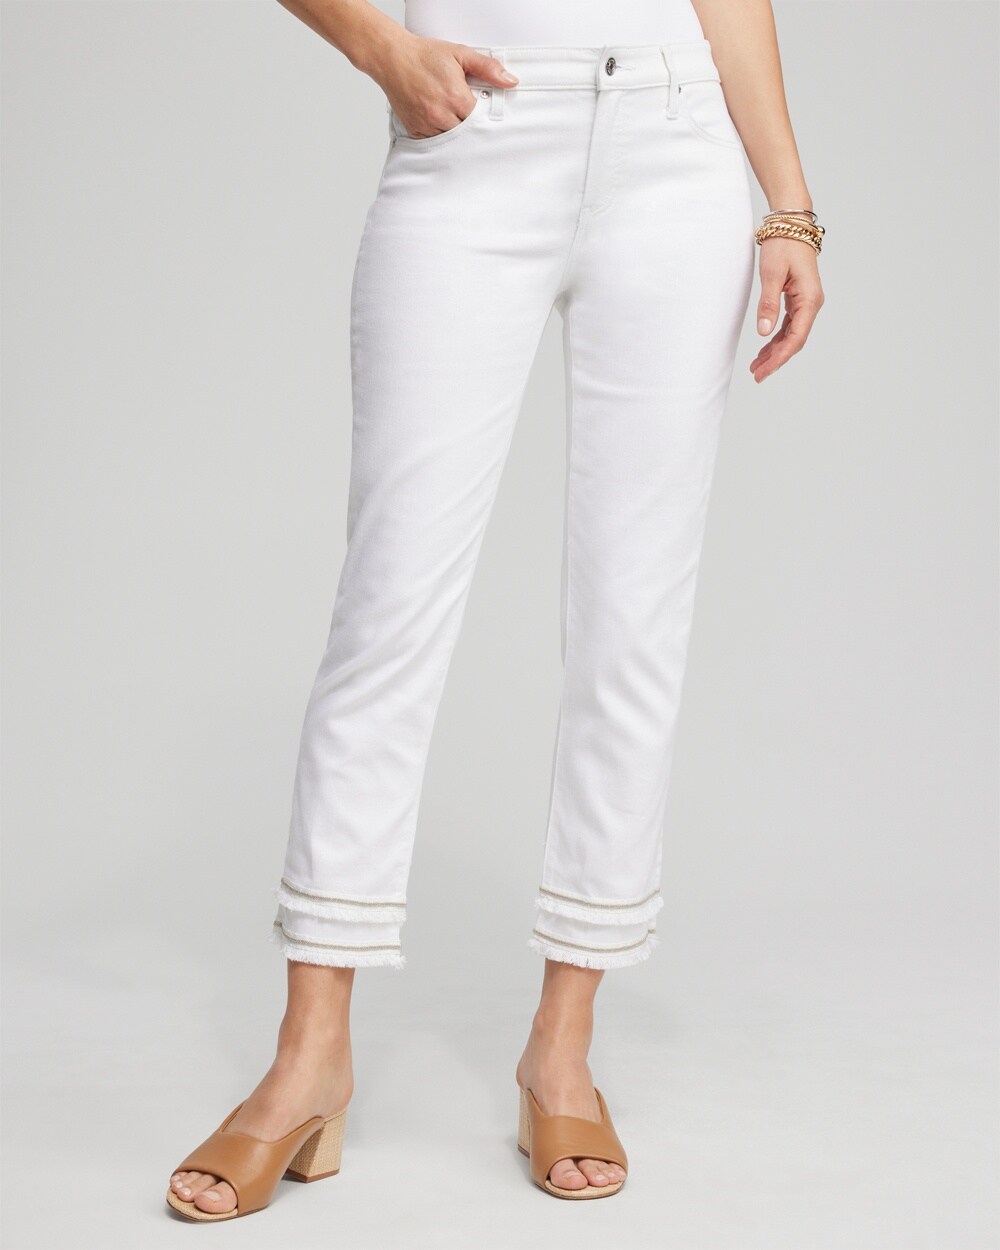 No Stain Girlfriend Embellished Hem Cropped Jeans